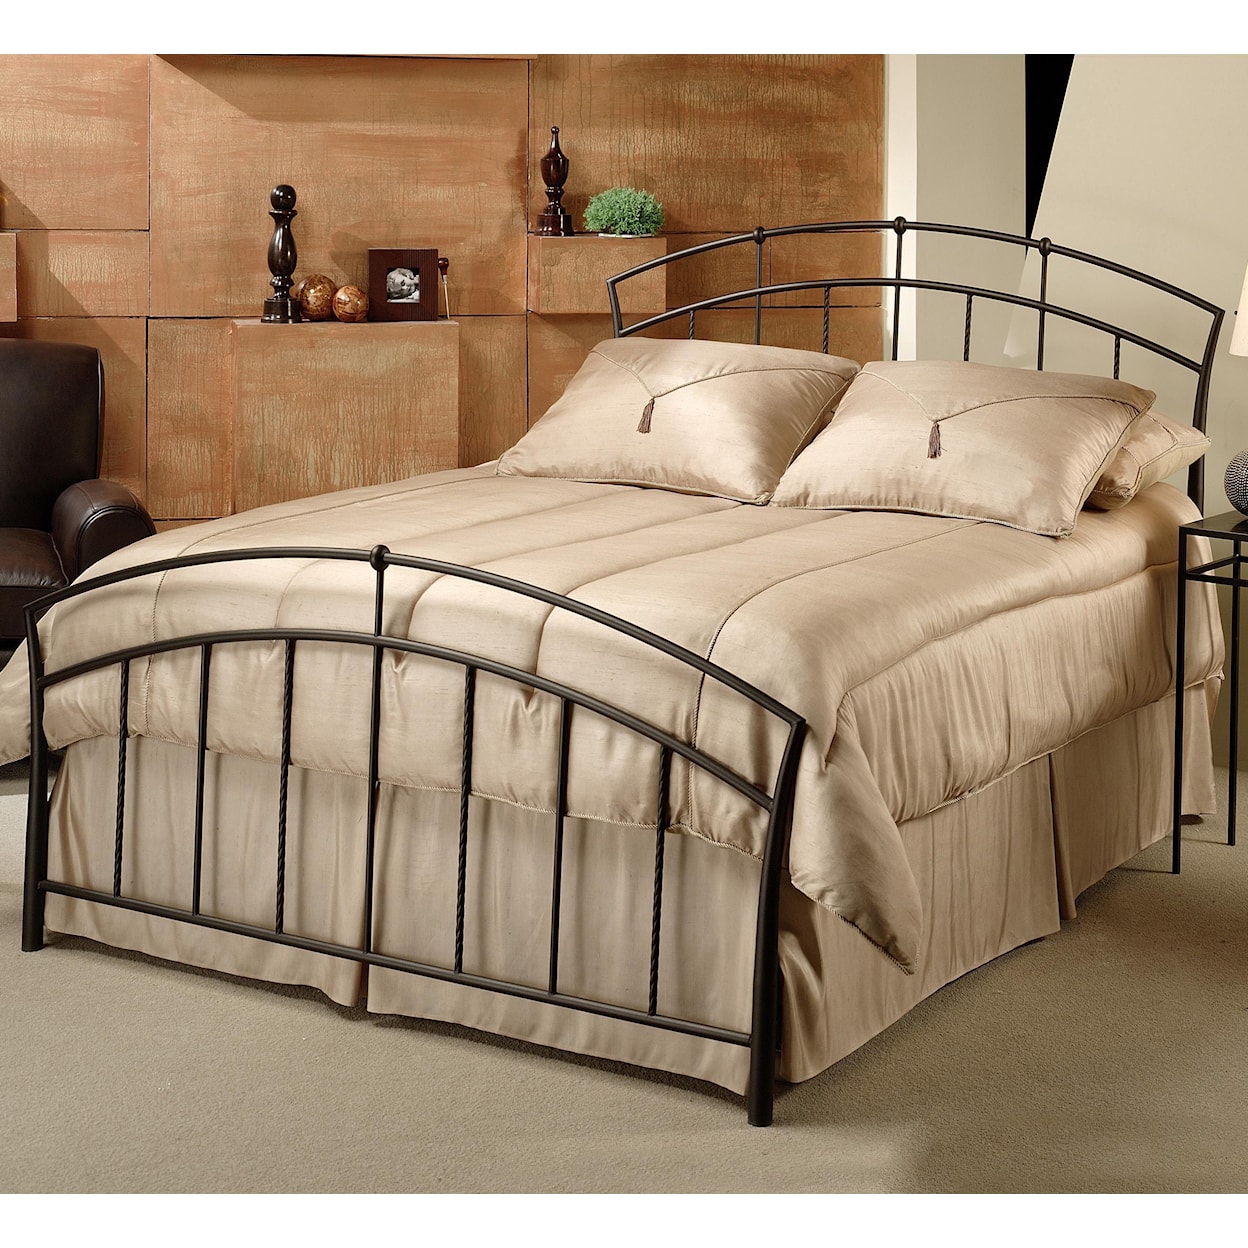 Hillsdale Metal Beds King Vancouver Bed